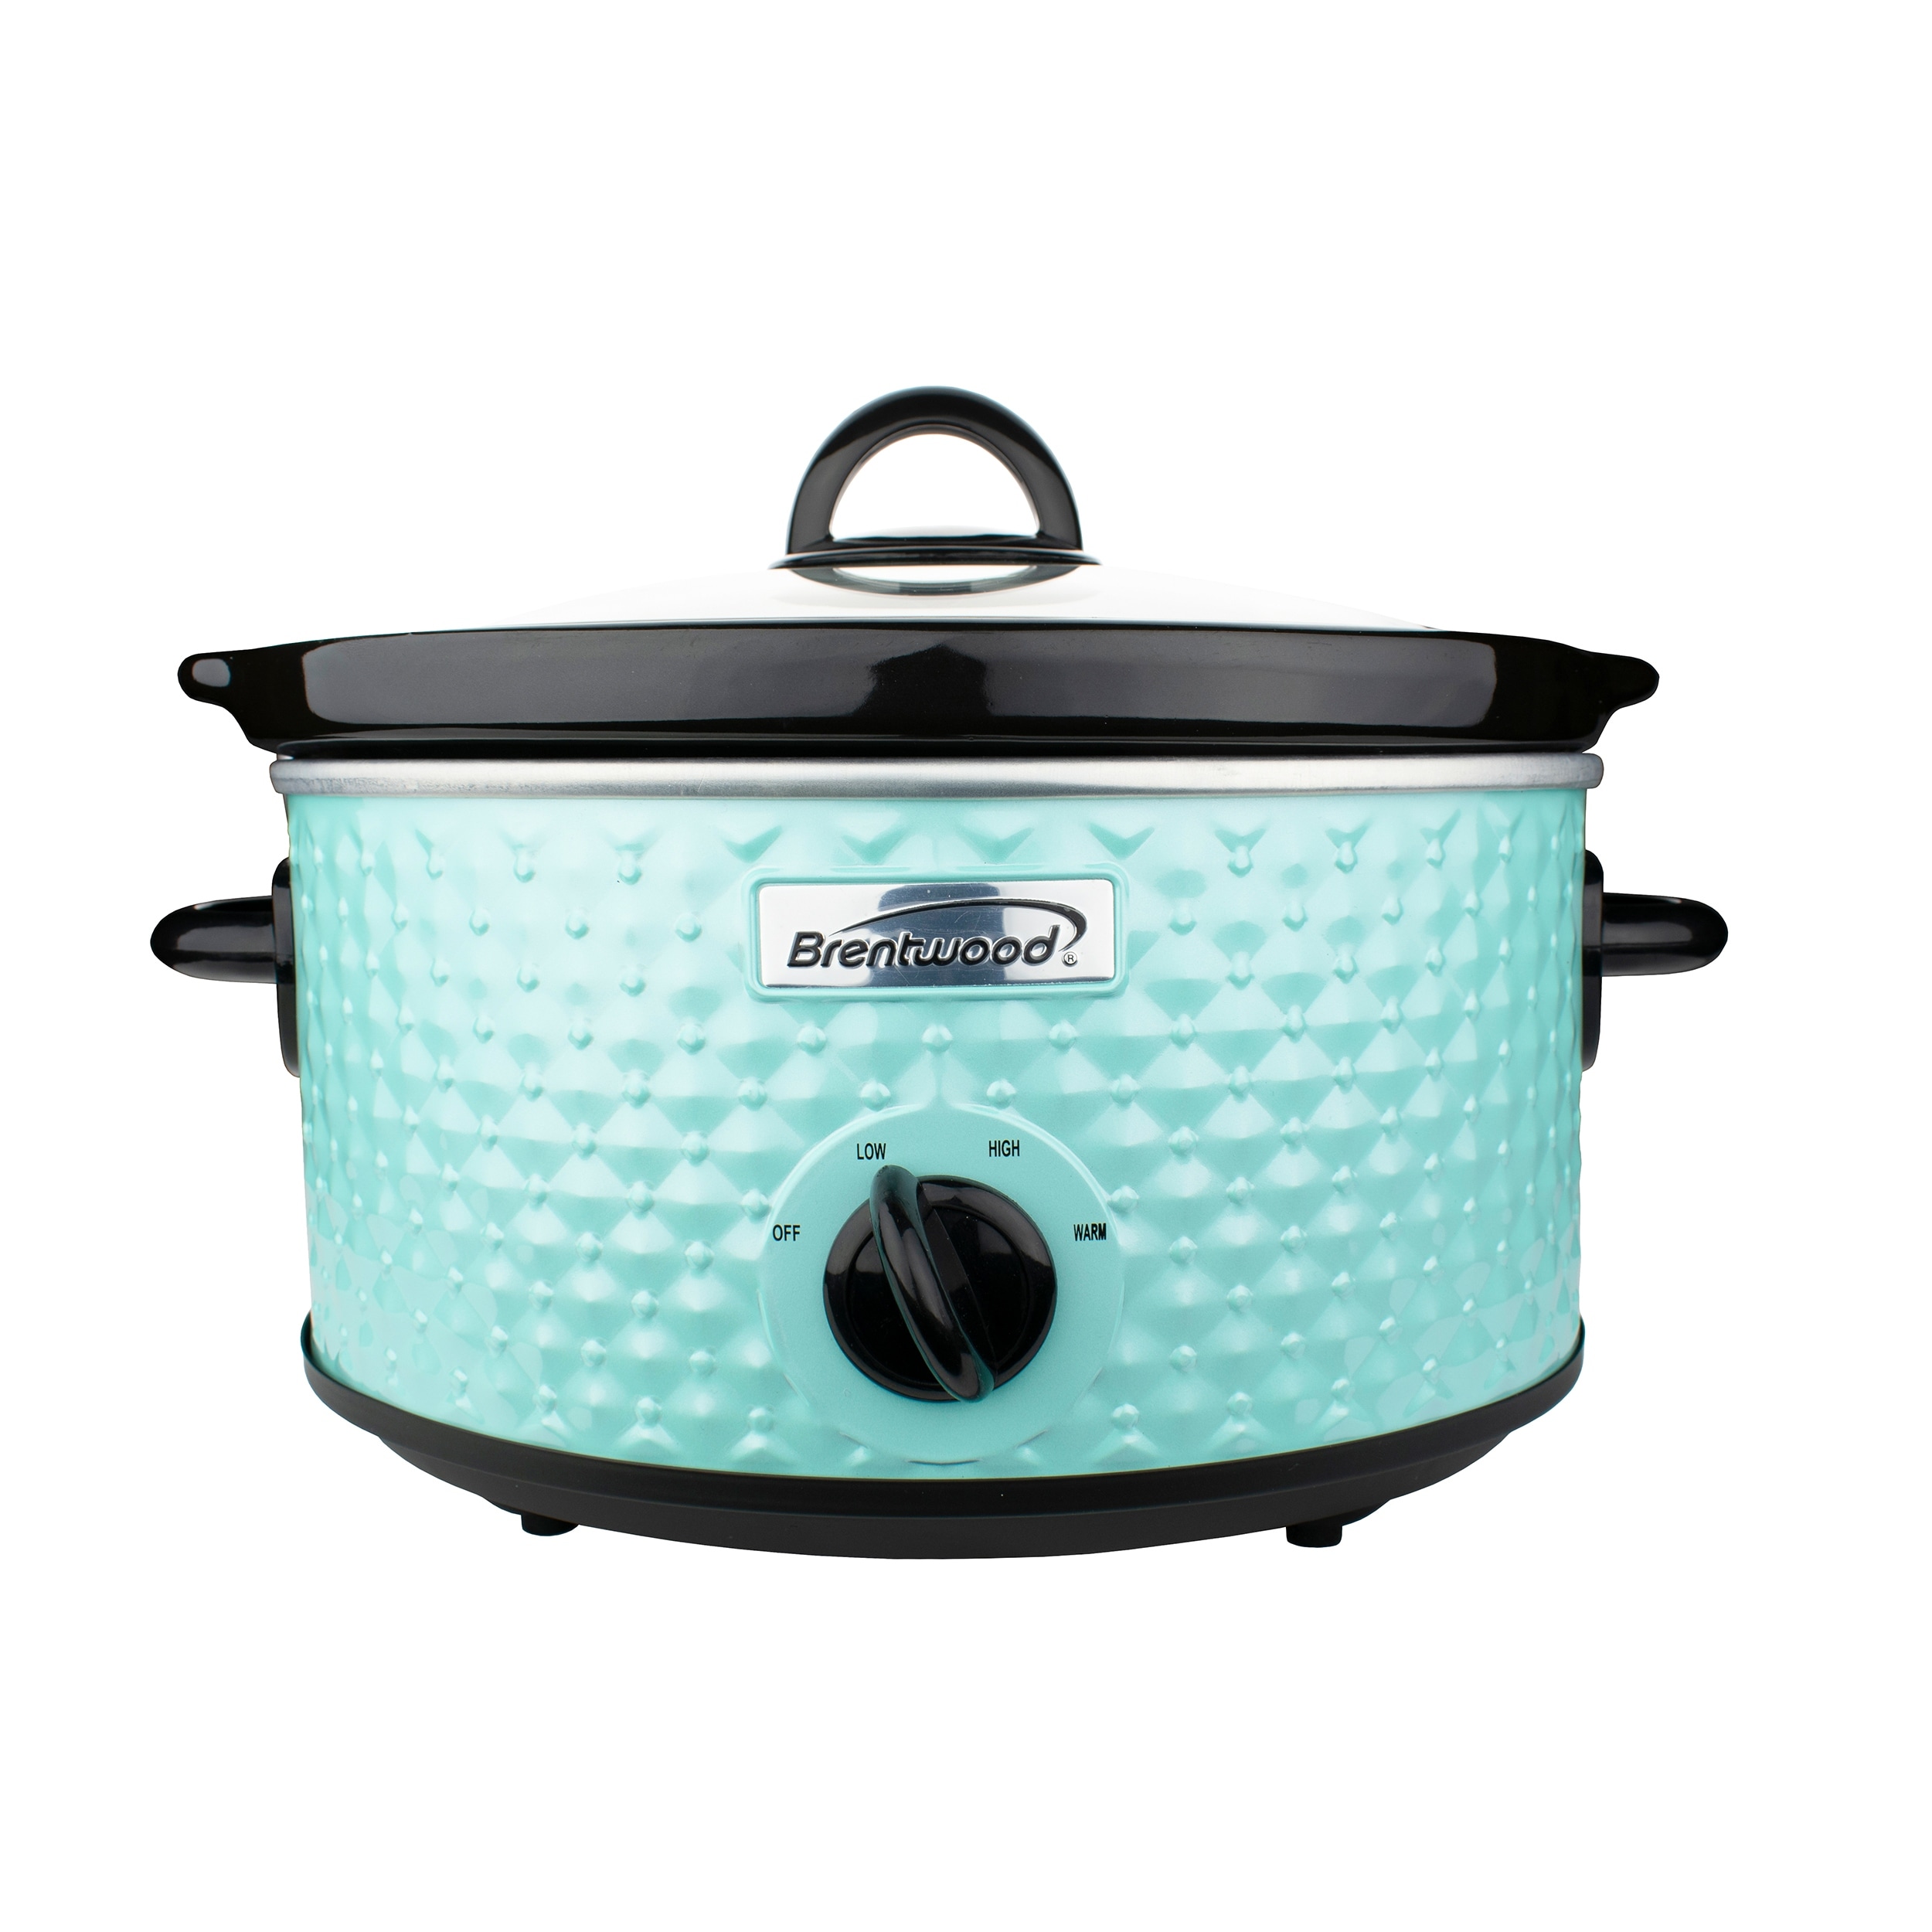 https://ak1.ostkcdn.com/images/products/is/images/direct/5997d6538e8d6b4e1082fdd4bc5a65cc6094b572/14-Cup-Argyle-Slow-Cooker-in-Turquoise.jpg